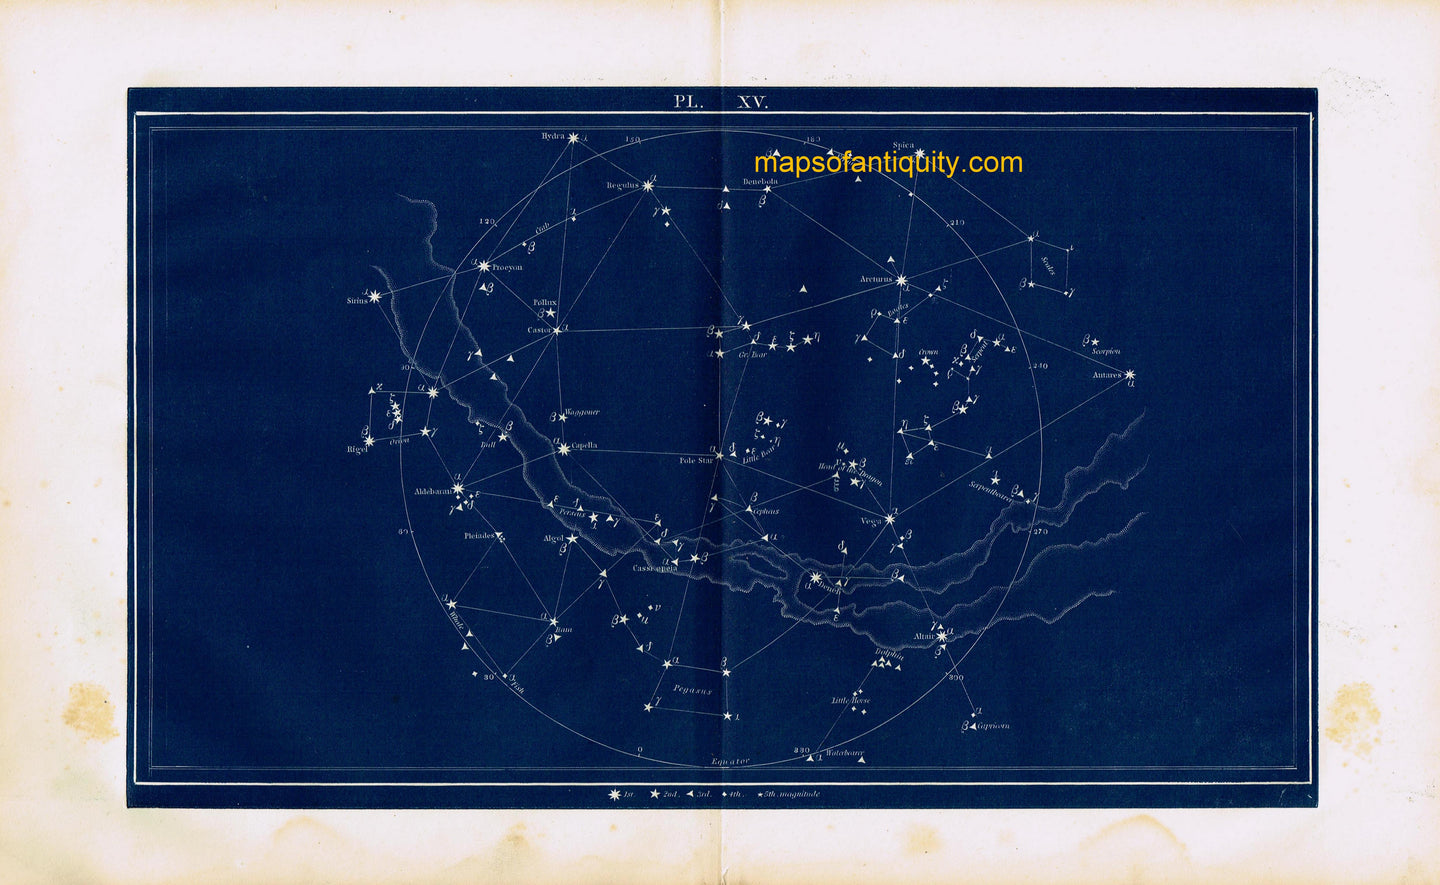 Antique-Printed-Color-Celestial-Map-Plate-XV-with-Constellations-and-the-Milky-Way-**********-Celestial--1846-Butler-Maps-Of-Antiquity